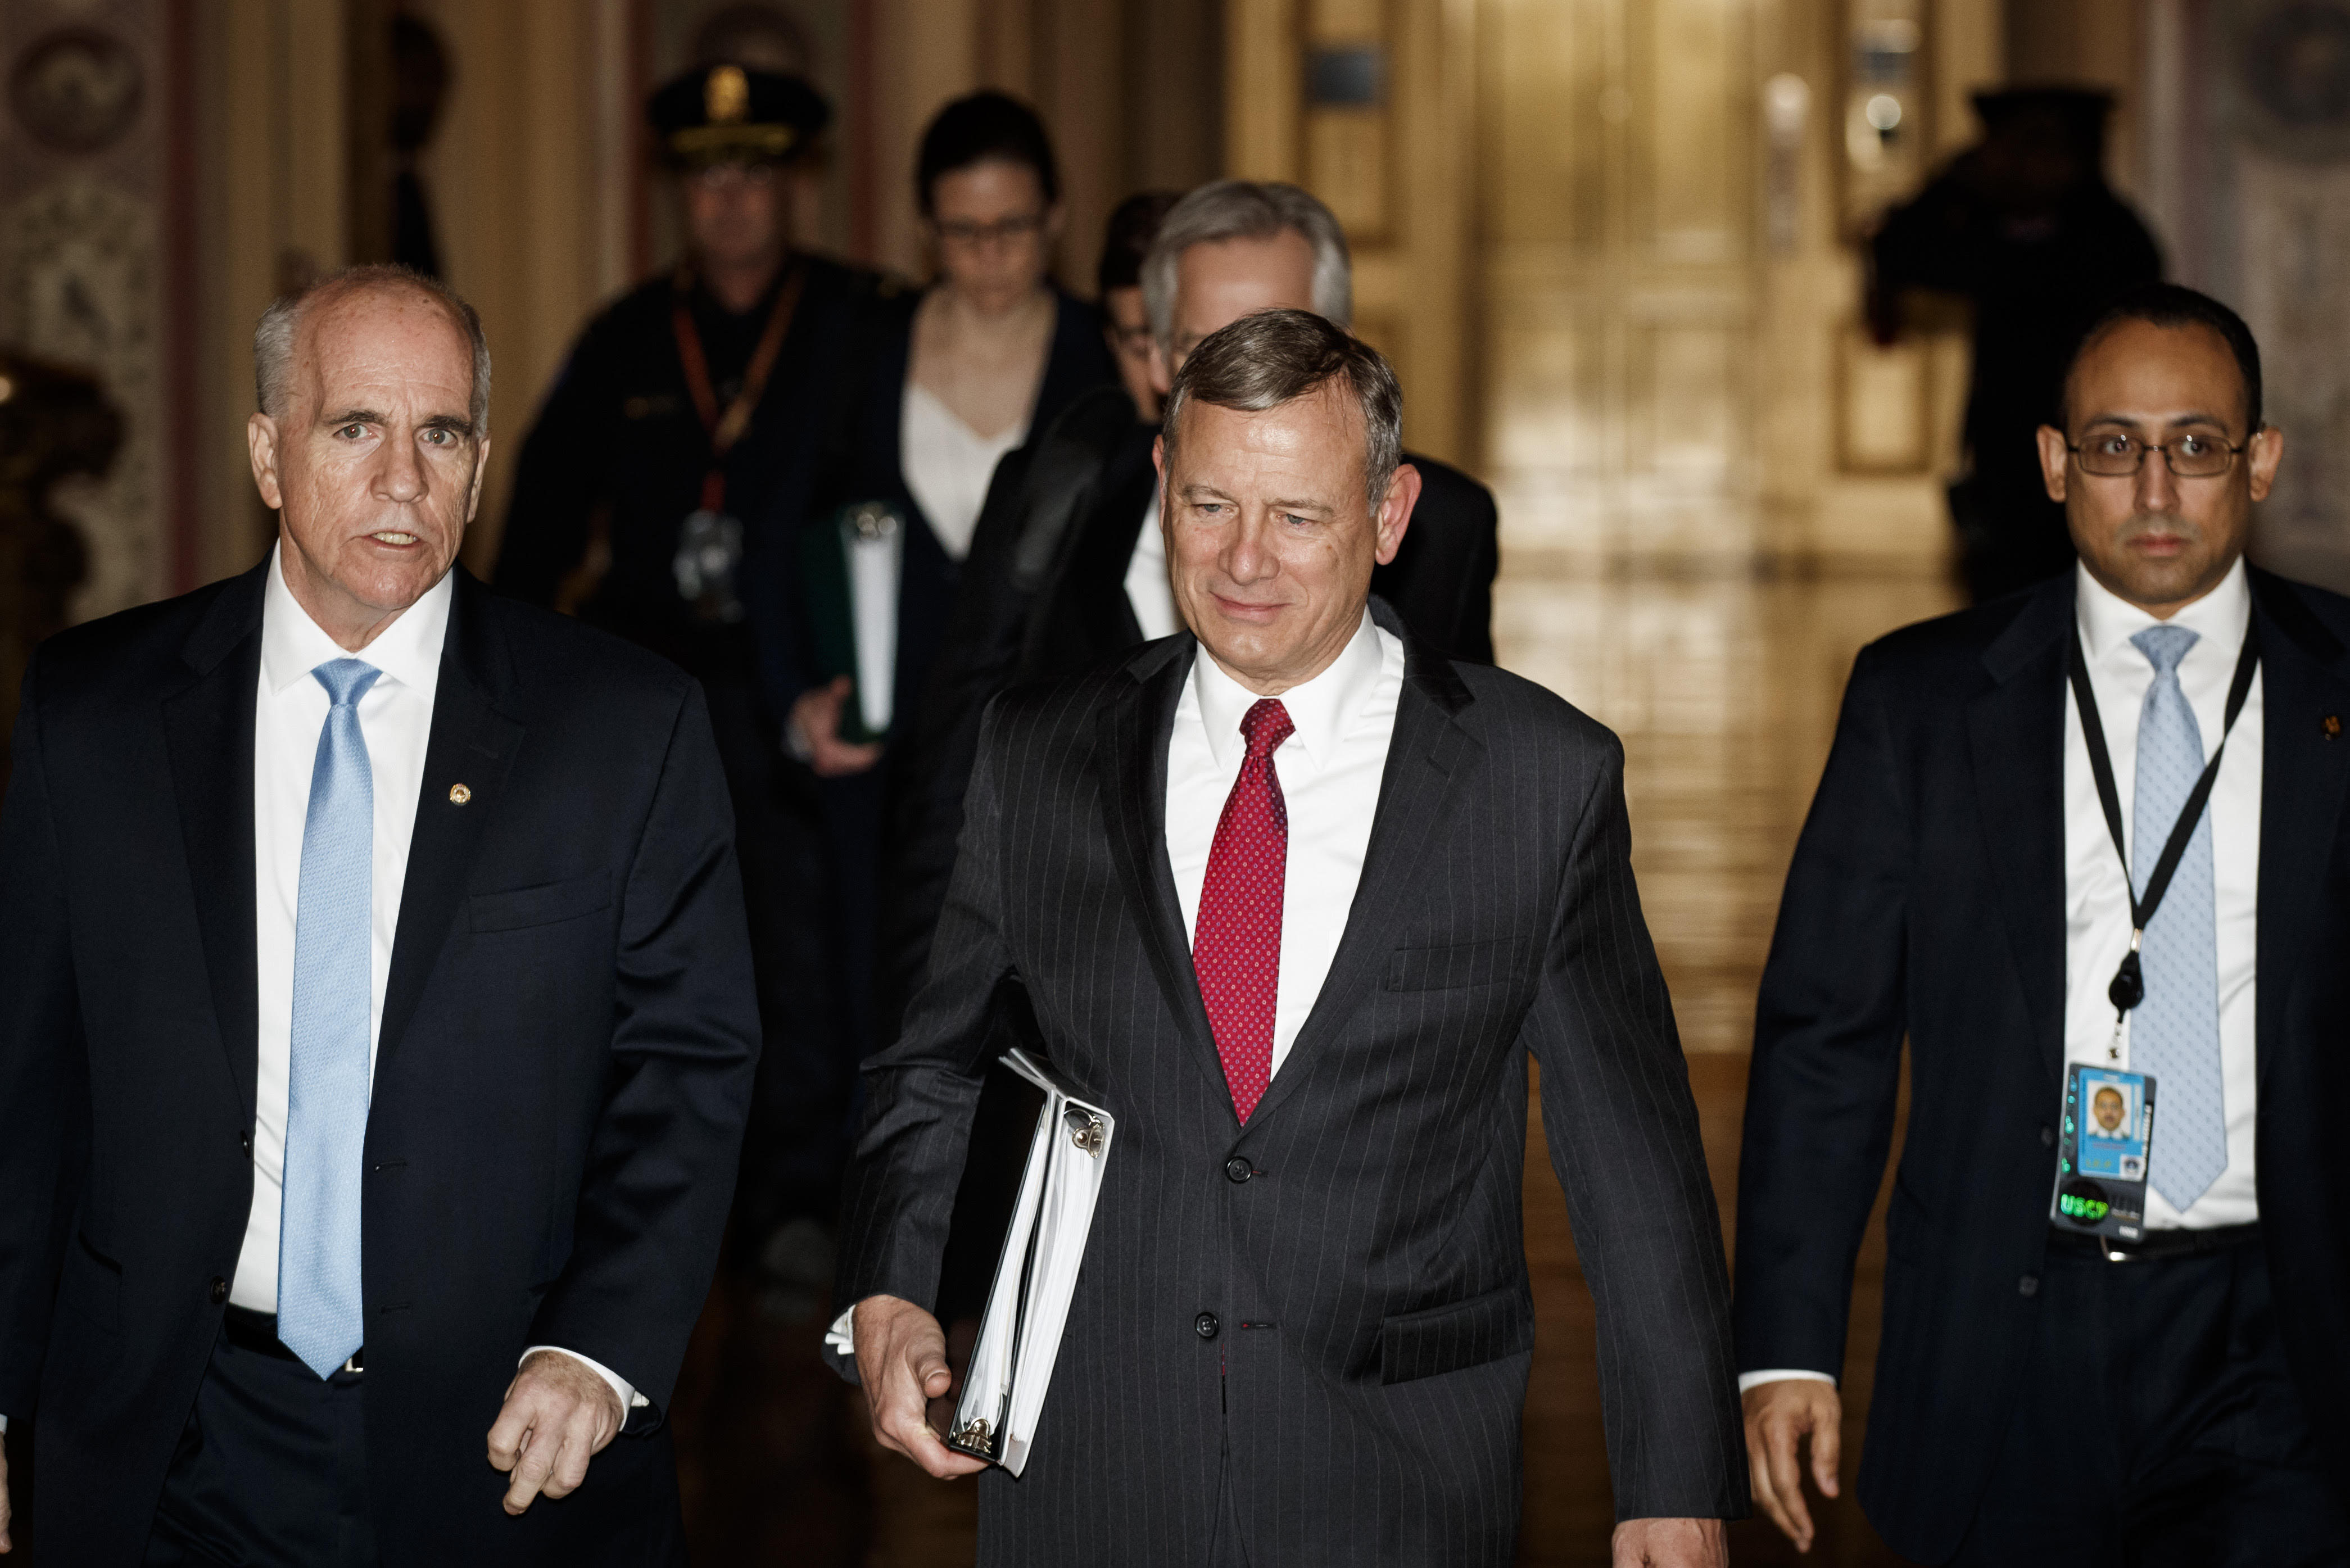 Chief Justice John Roberts walks through the halls of the U.S. Senate after swearing in for the Senate impeachment trial against President Donald Trump, in Washington, DC, on January 16, 2020.